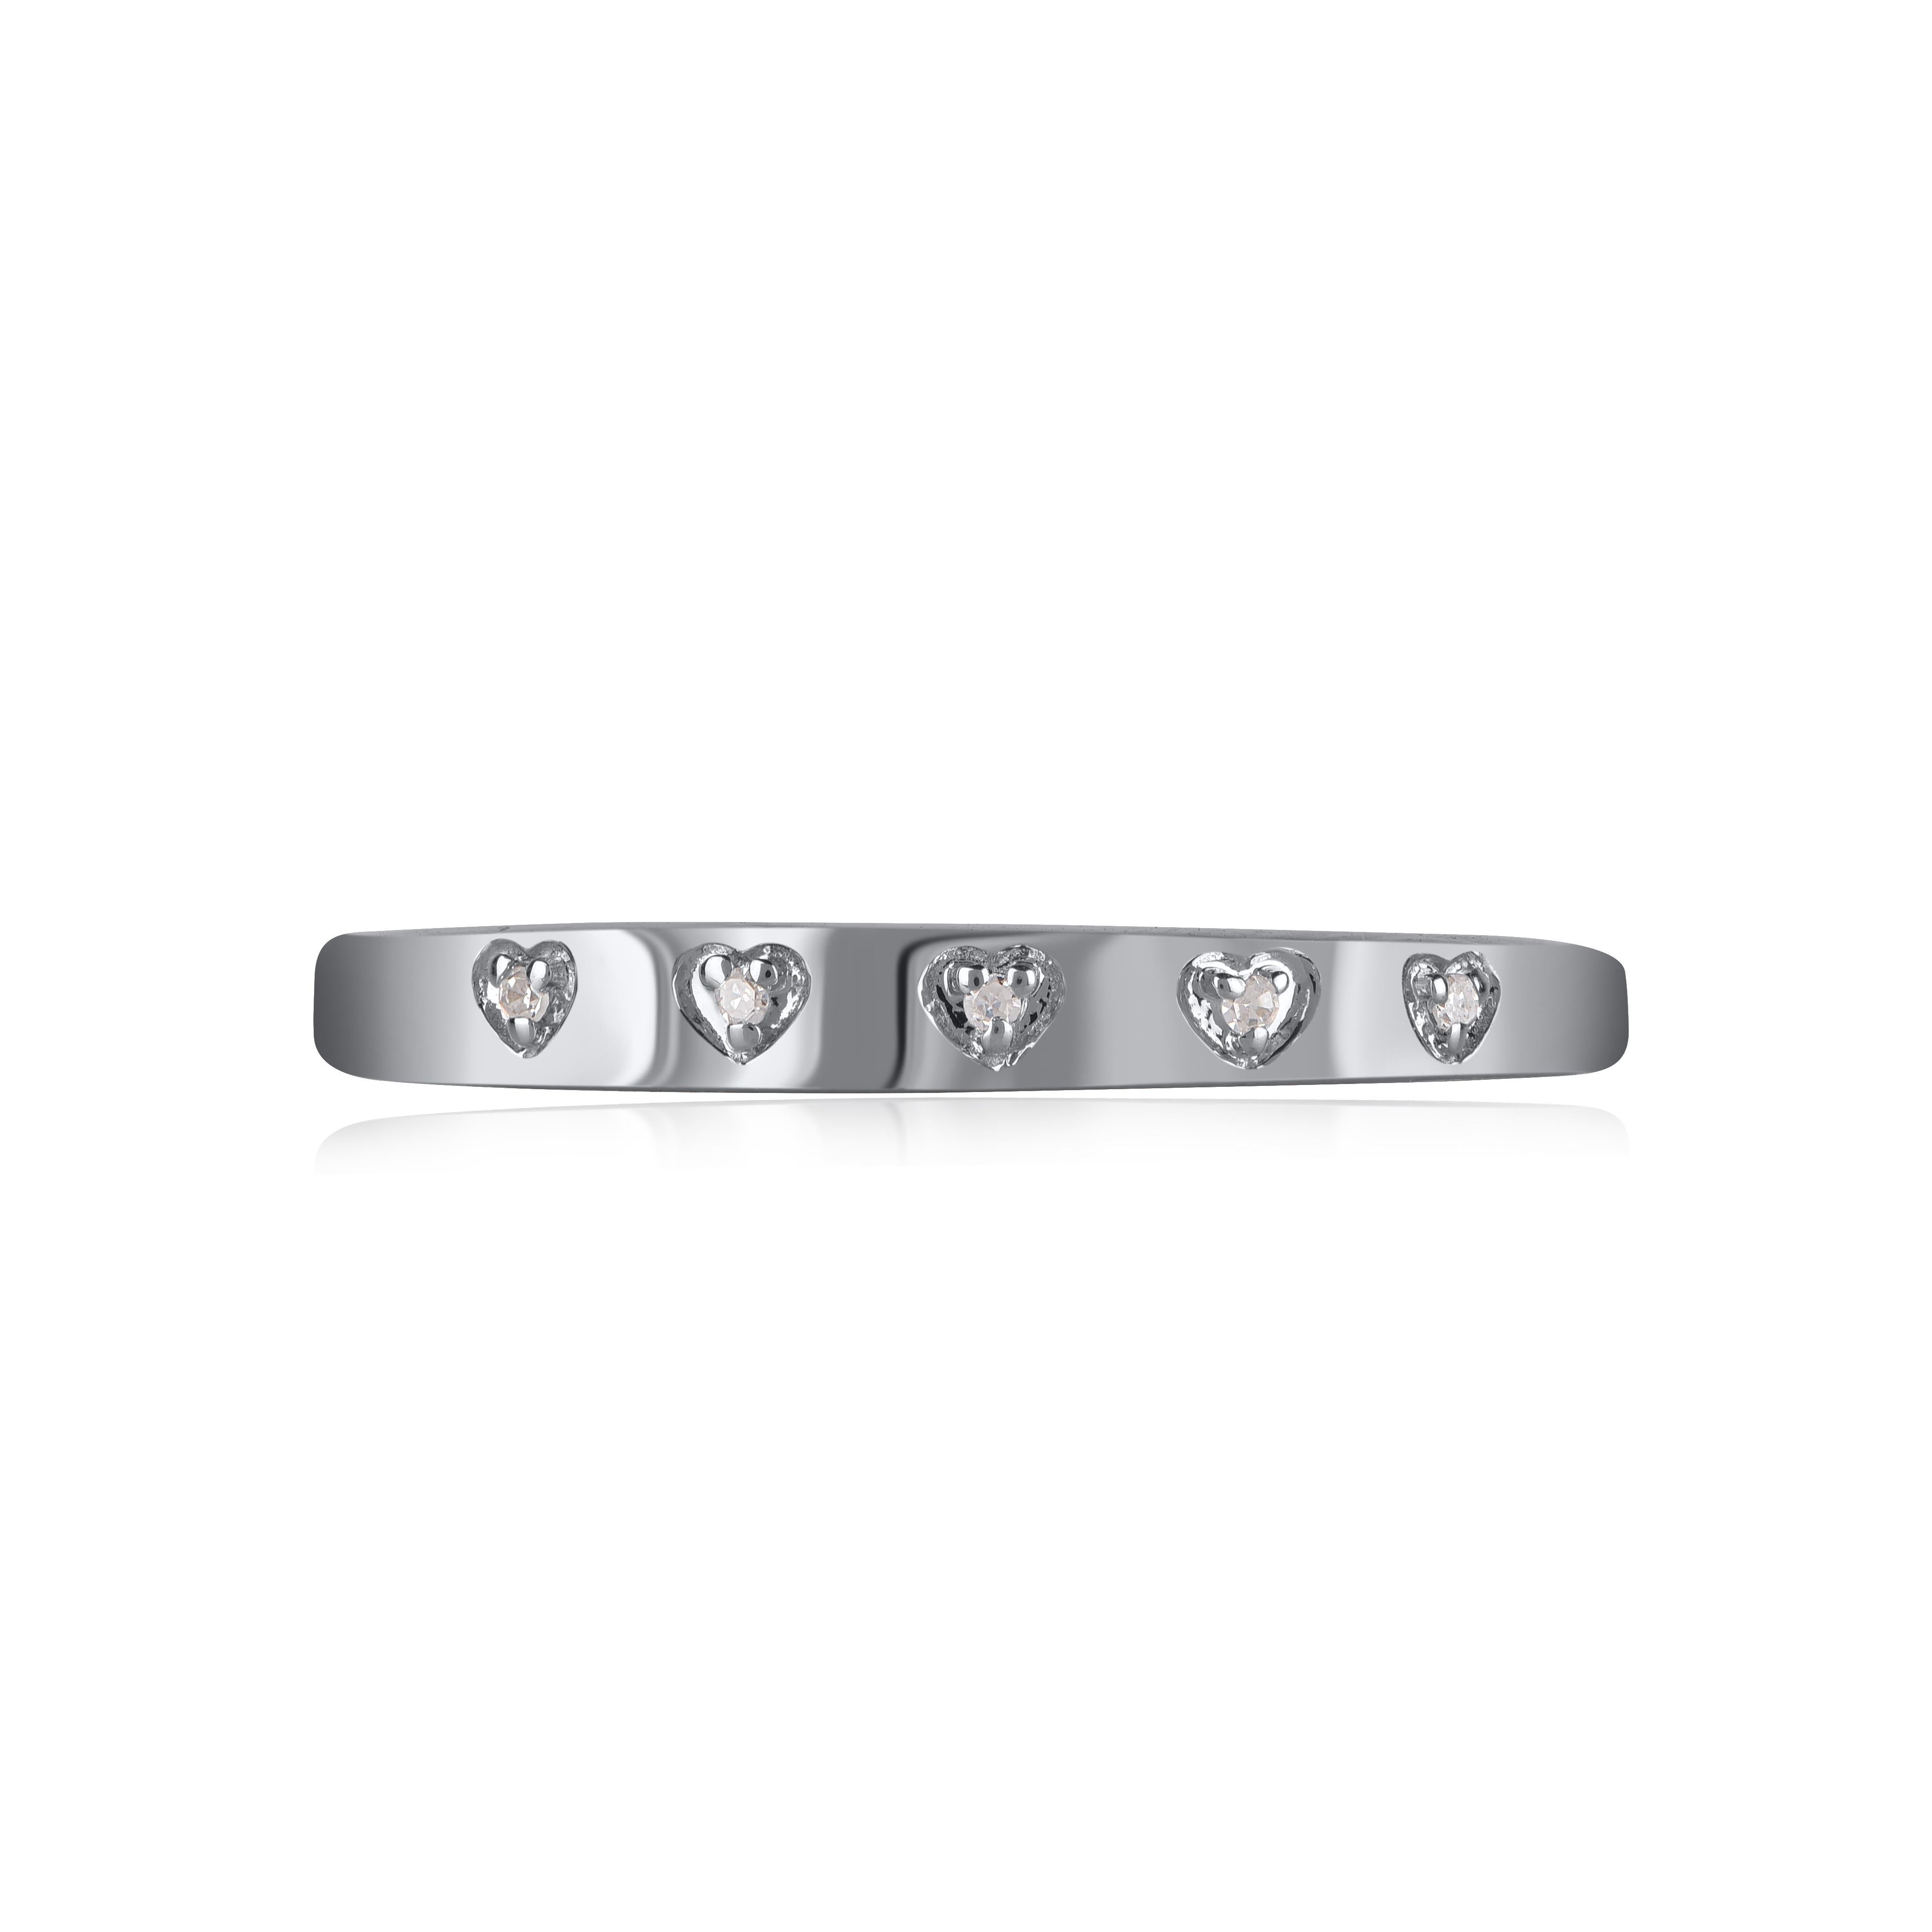 Bring charm to your look with this diamond wedding band Ring. This ring is beautifully crafted in 14 Karat white gold and embedded with 5 natural single cut diamonds in pave setting. Total diamond weight is 0.02 carat. The diamonds are graded as H-I